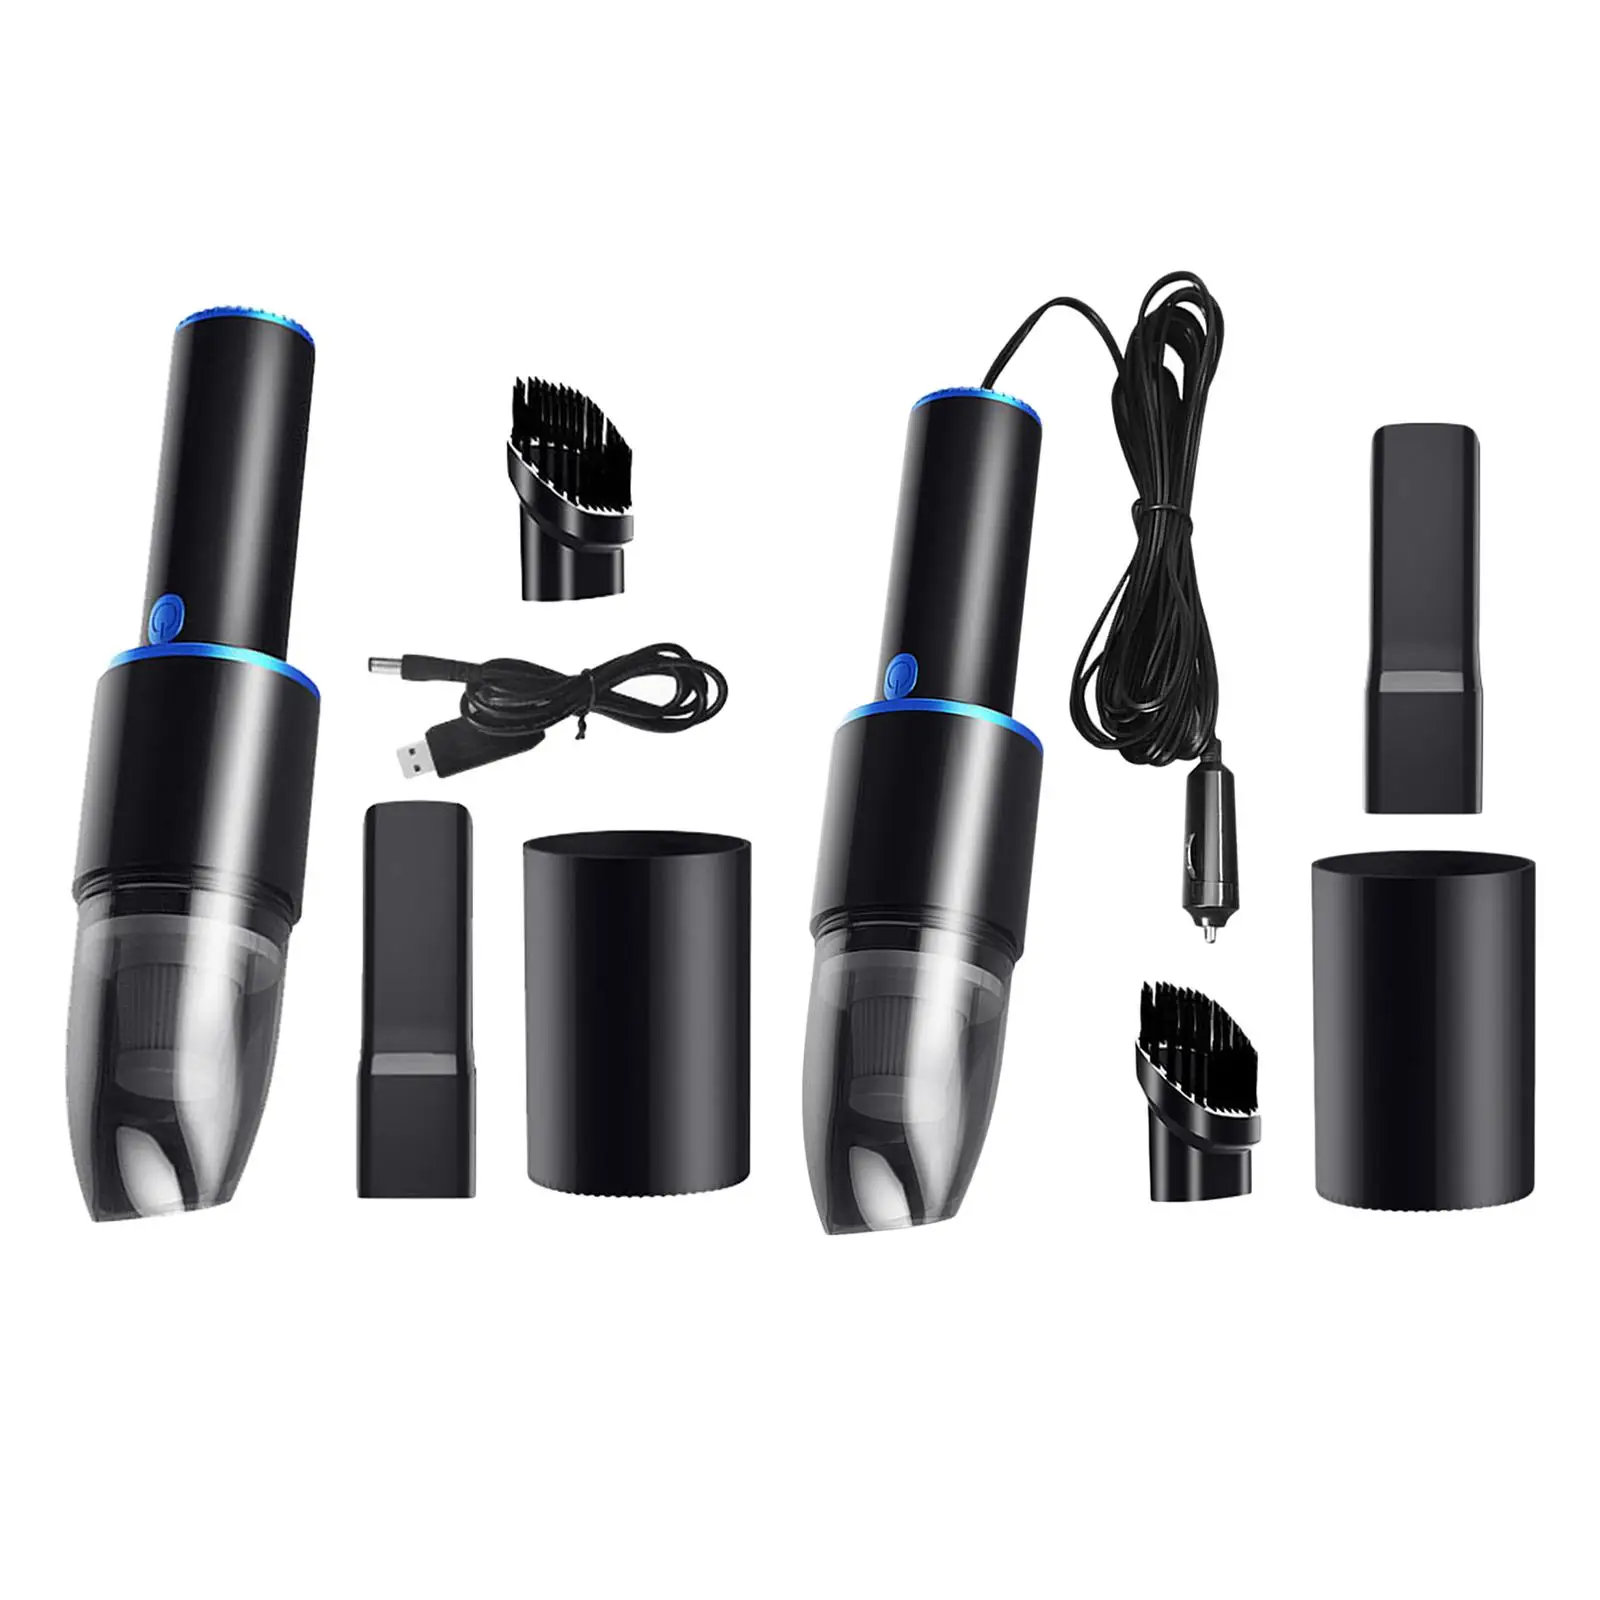 Handheld Car Vacuum Cleaner 10000PA Cyclone Suction for Home Use Vehicle Parts